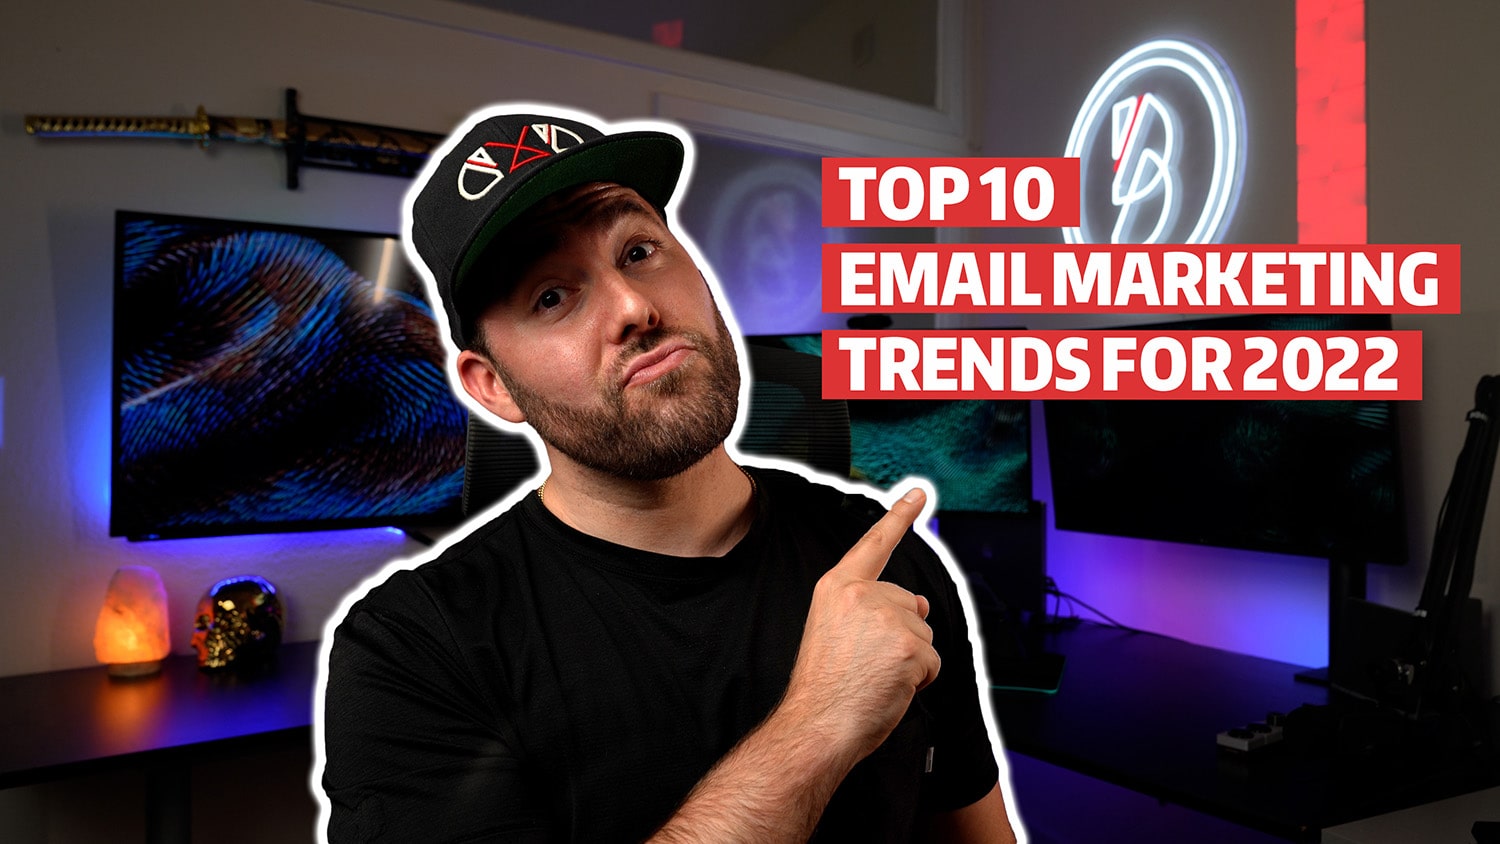 Top 10 Email Marketing Trends For 2022